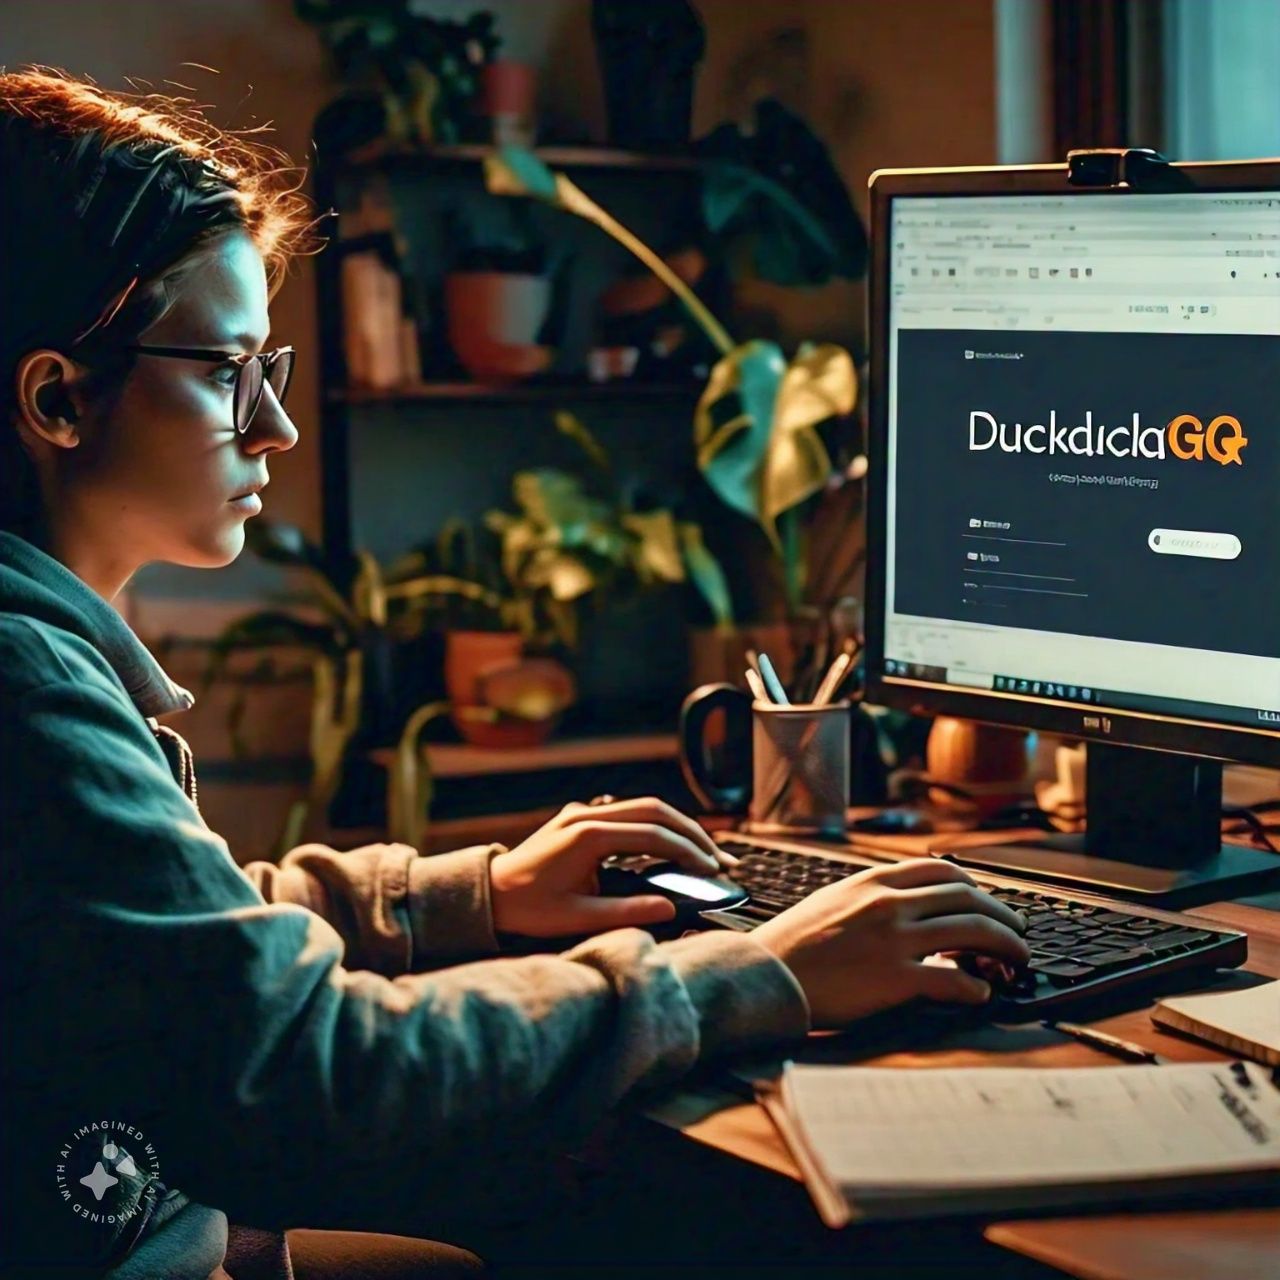 Enhance Your Privacy: Using a Proxy with DuckDuckGo for Ultimate Online Anonymity